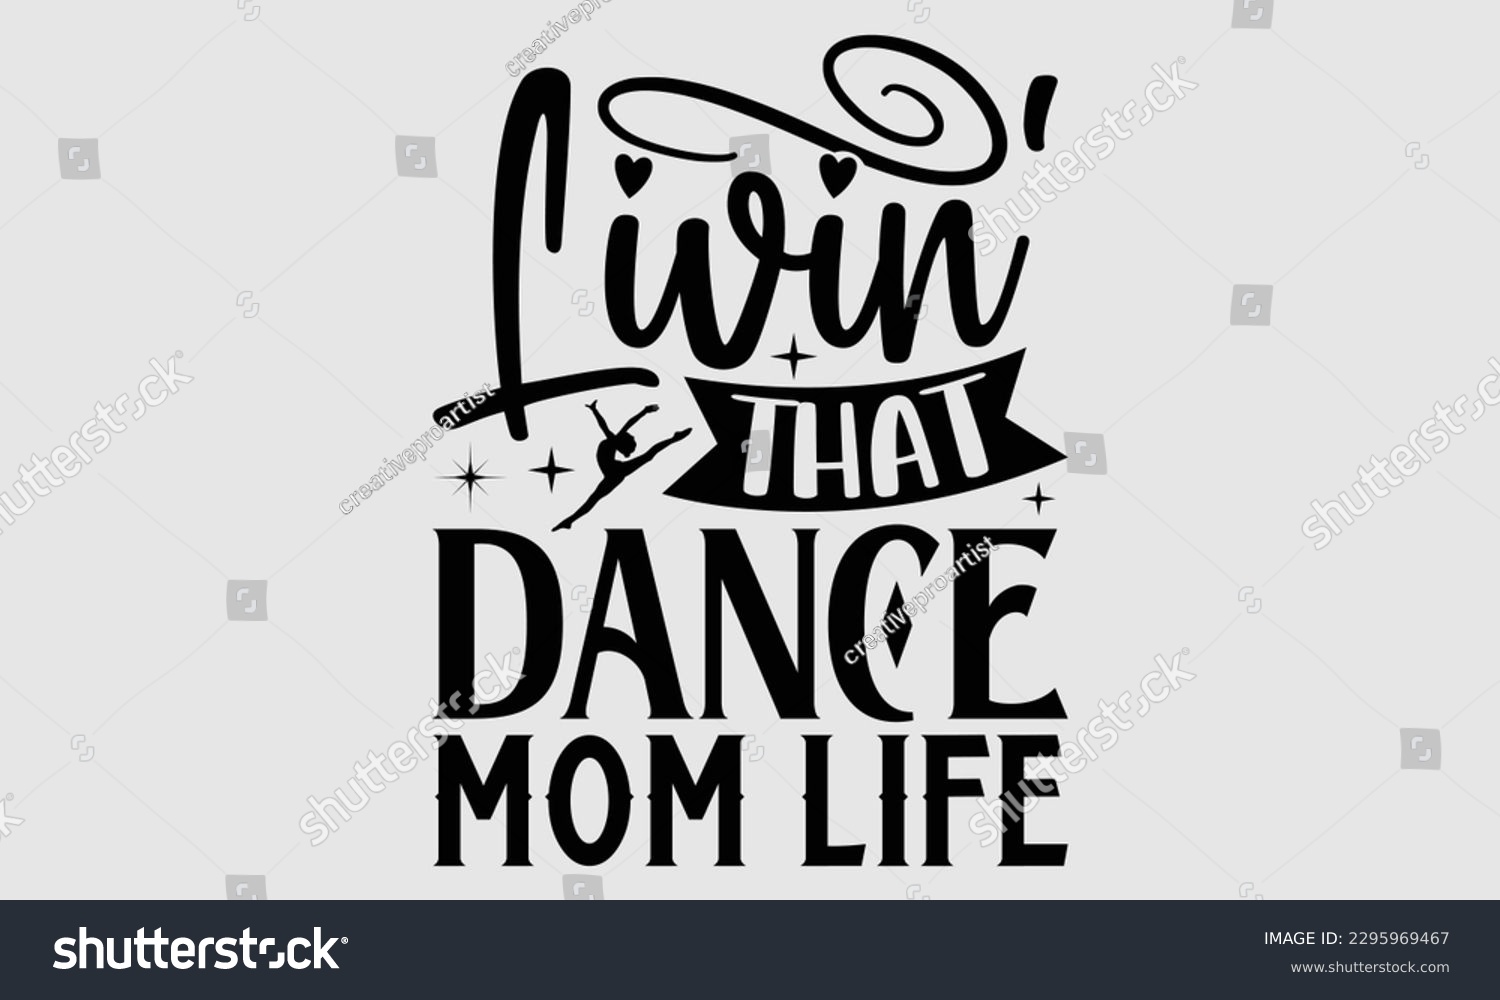 SVG of Livin' that dance mom life- Dances SVG design, Hand drawn lettering phrase, This illustration can be used as a print on t-shirts and bags, Vector Template EPS 10 svg